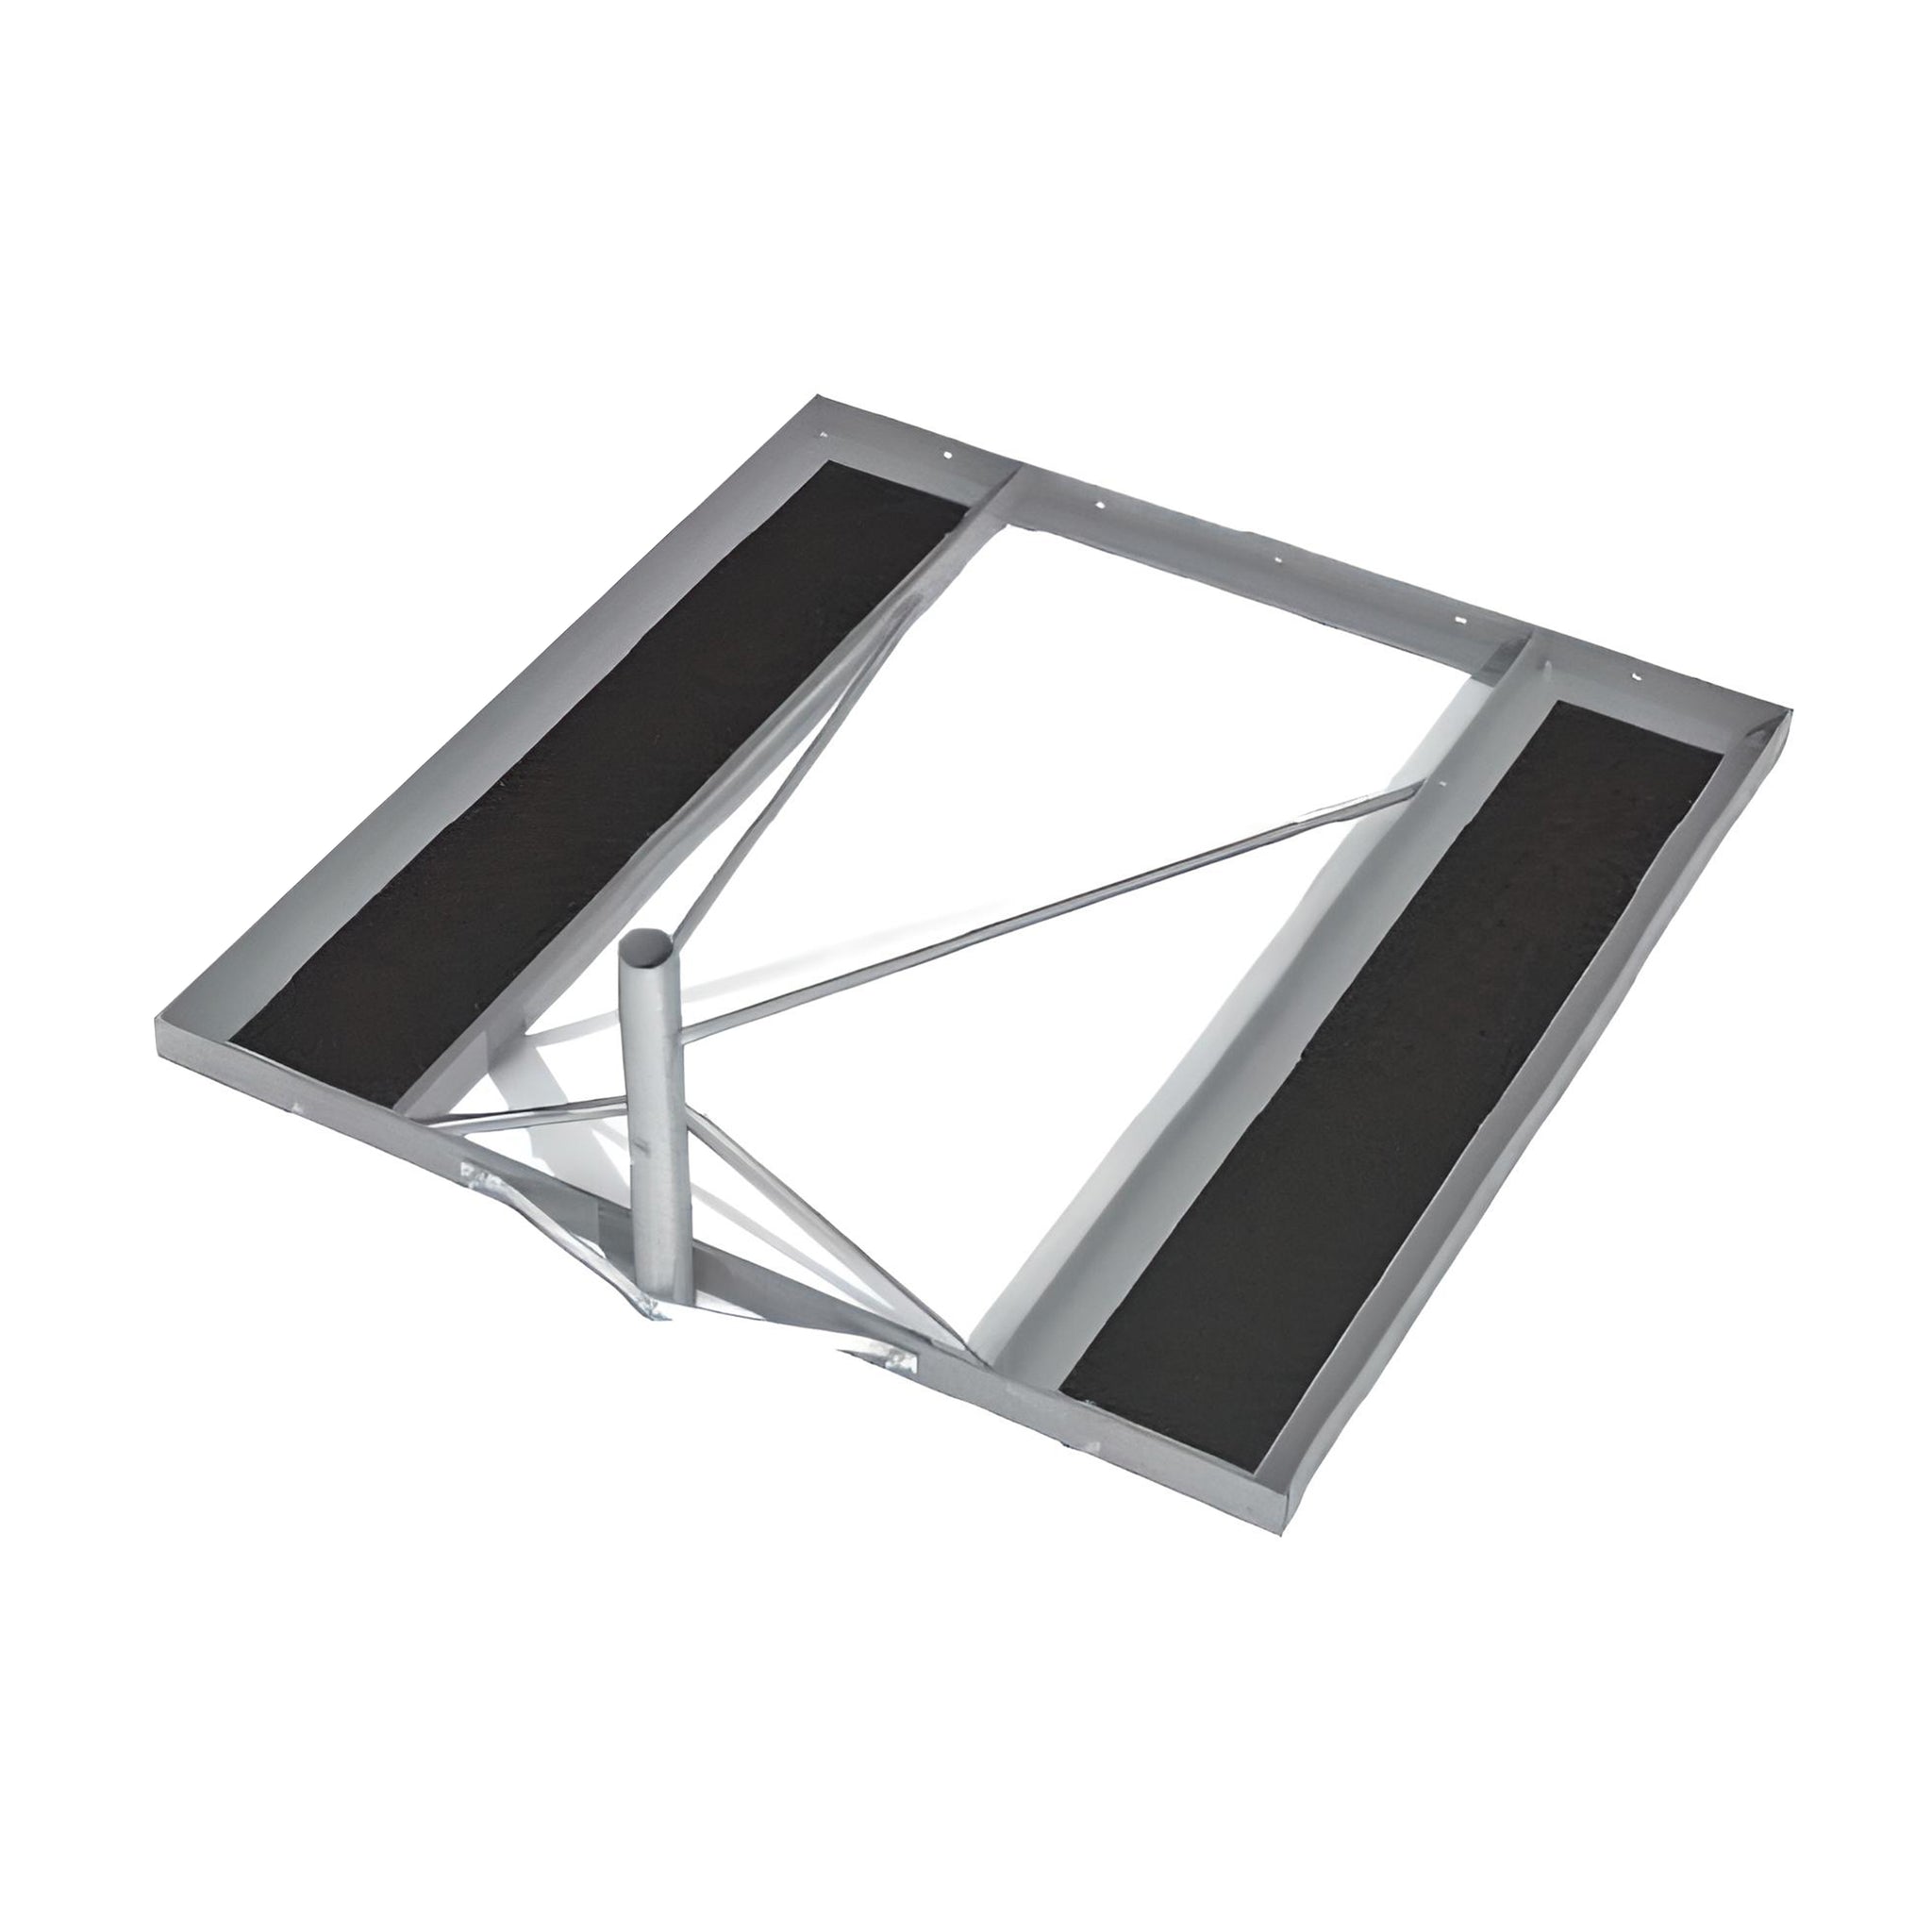 1.98m x 1.98m Non-Penetrating Roof Mount with Roof Pads